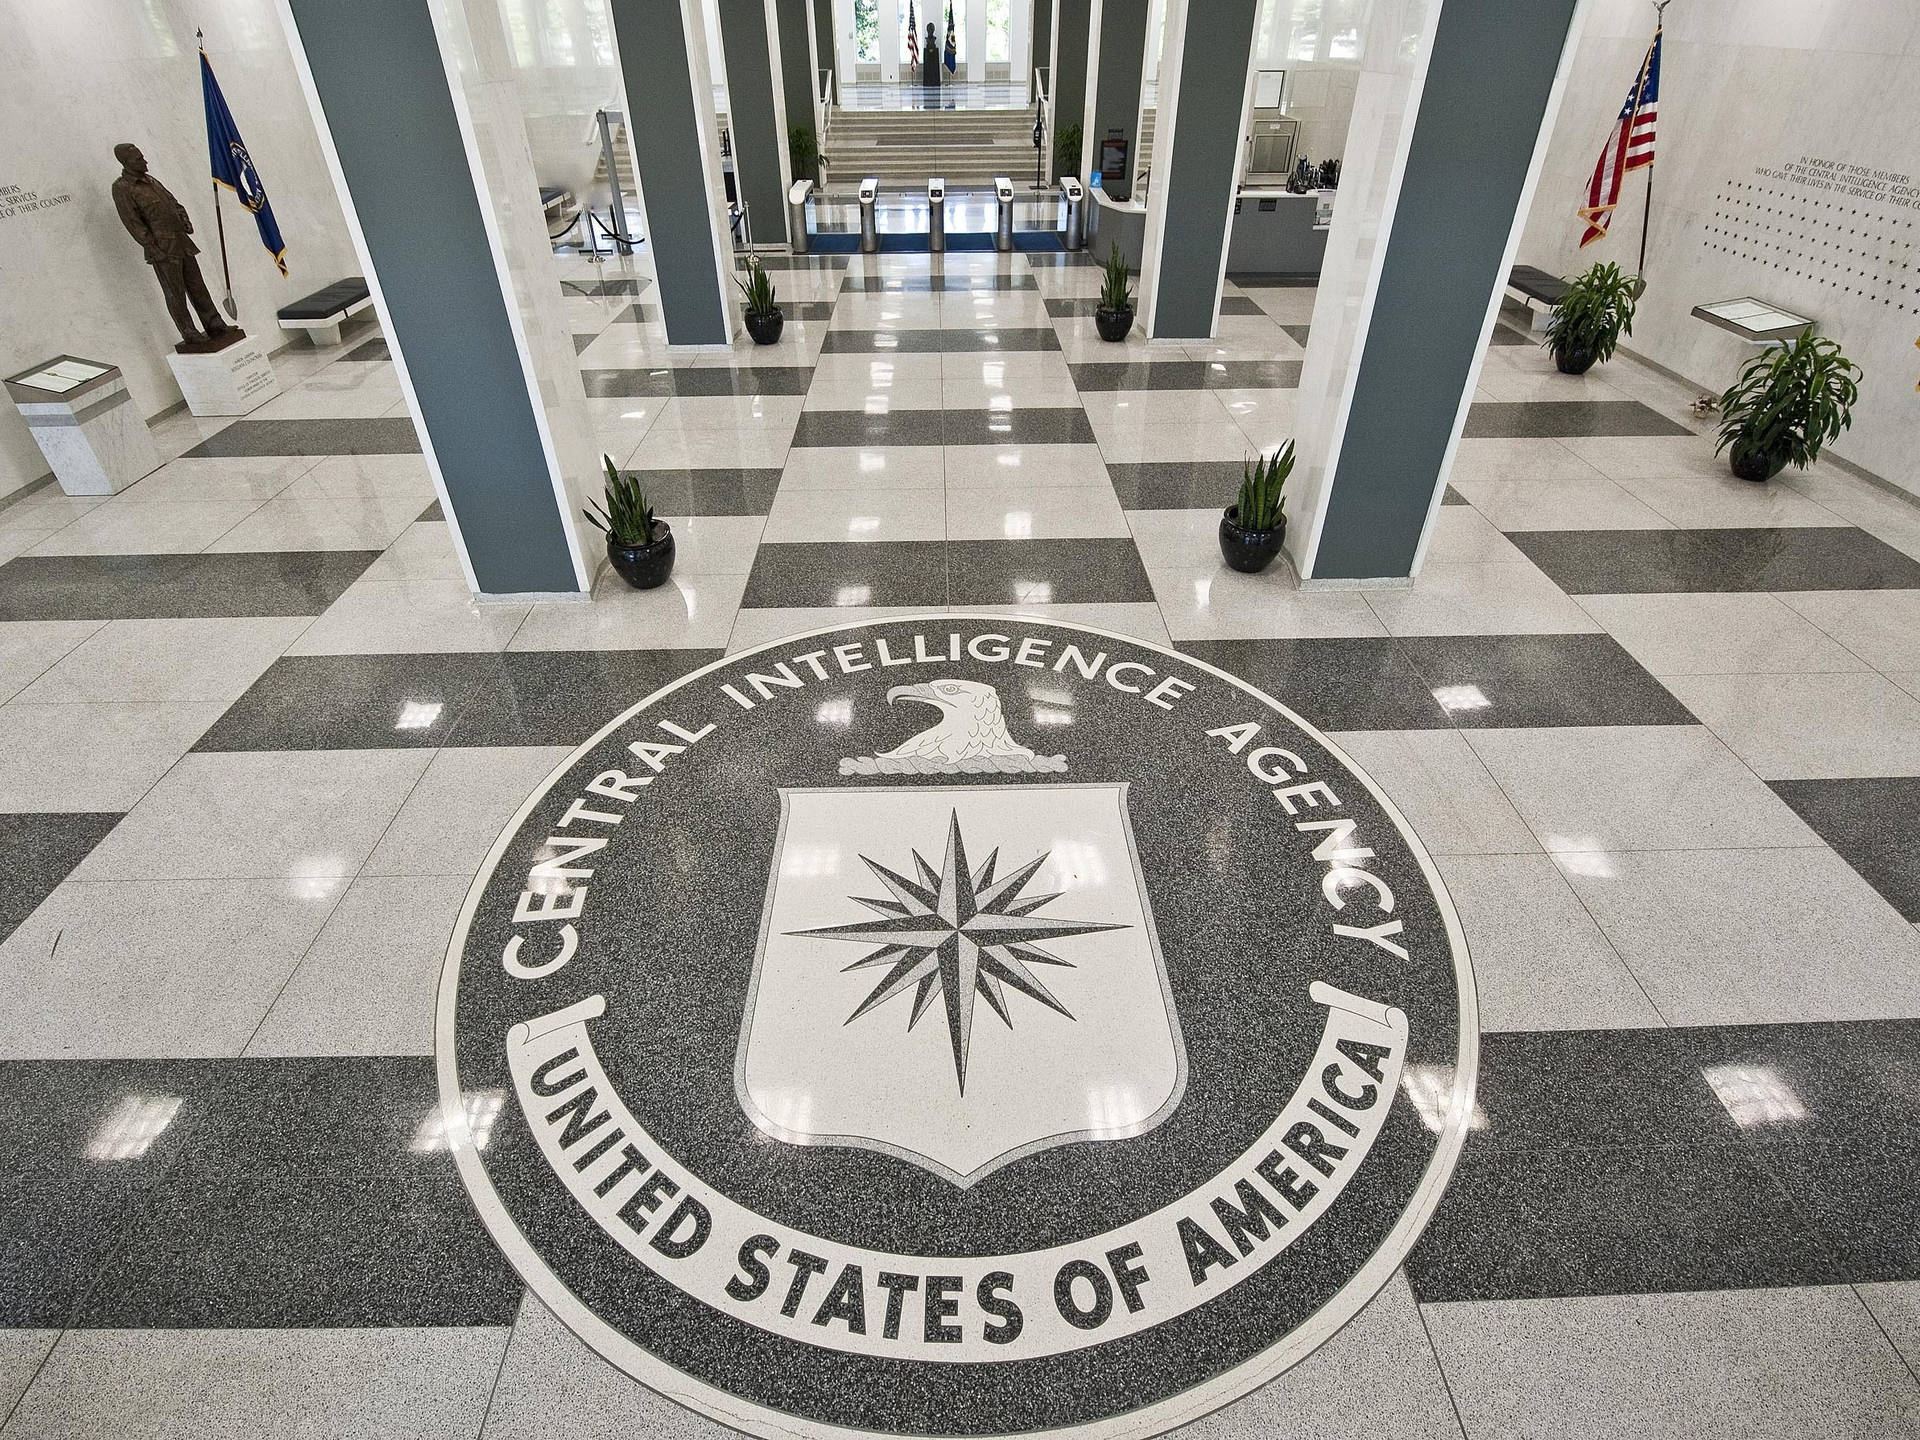 Emblem Of Authority - Cia Logo On Government Building